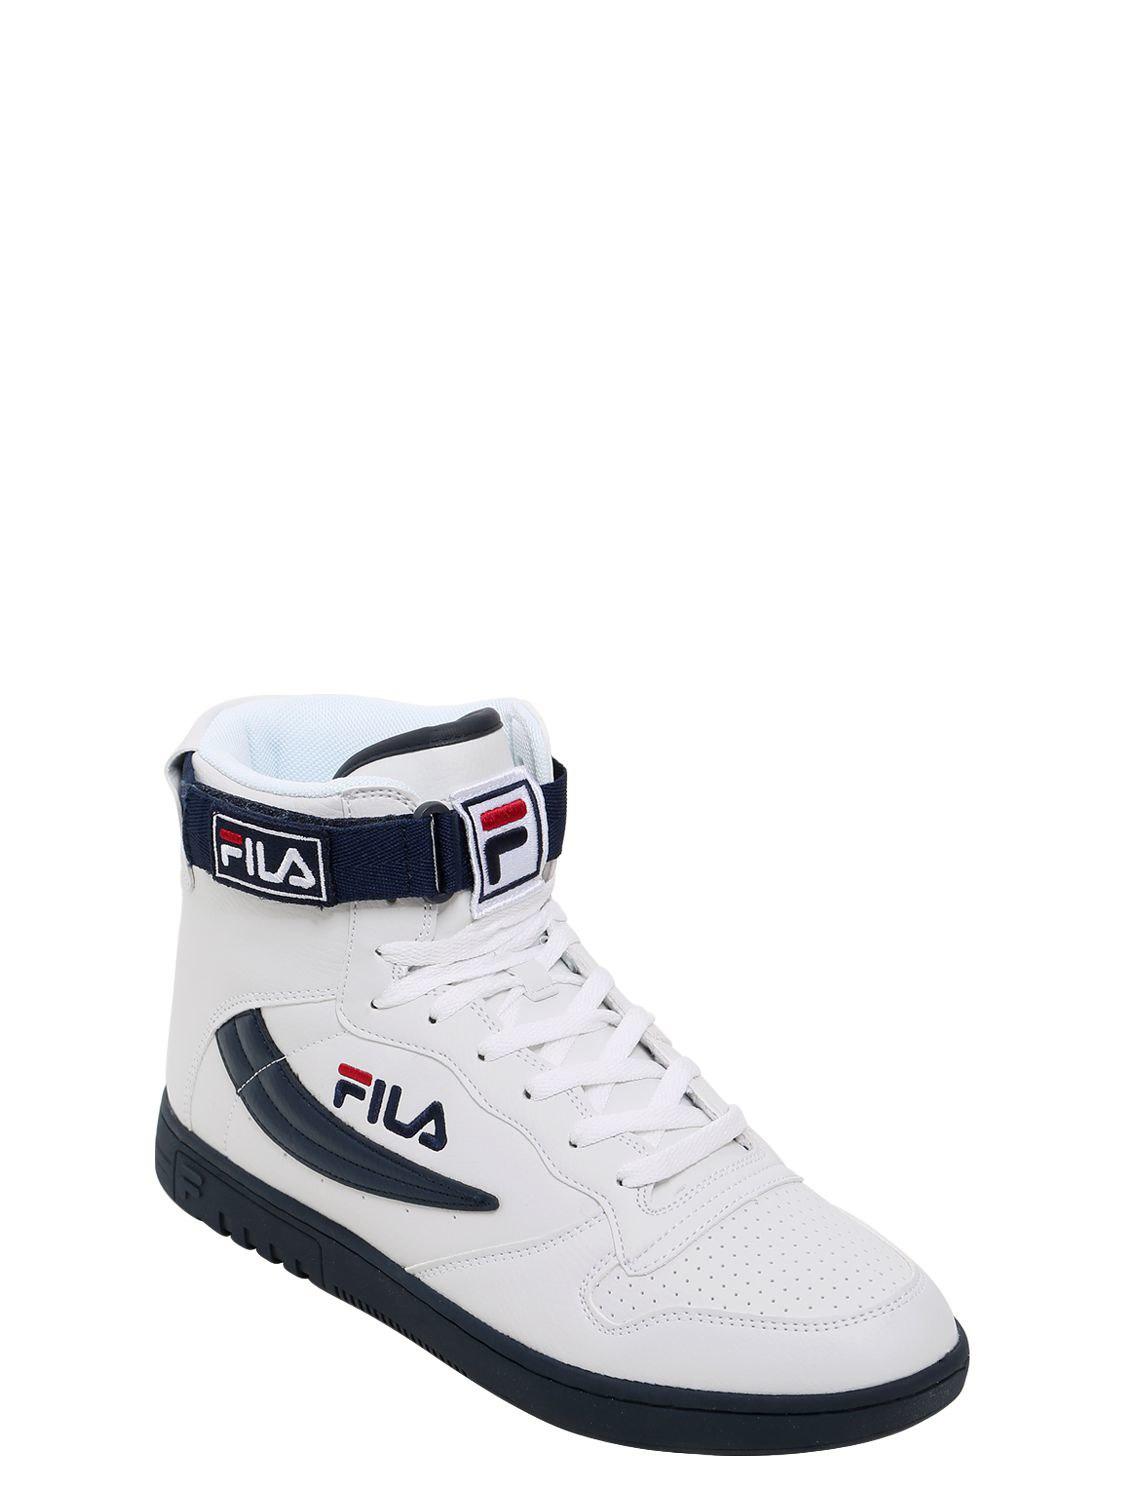 Fila Leather High Top Basketball Sneakers in White/Blue (Blue) for Men ...